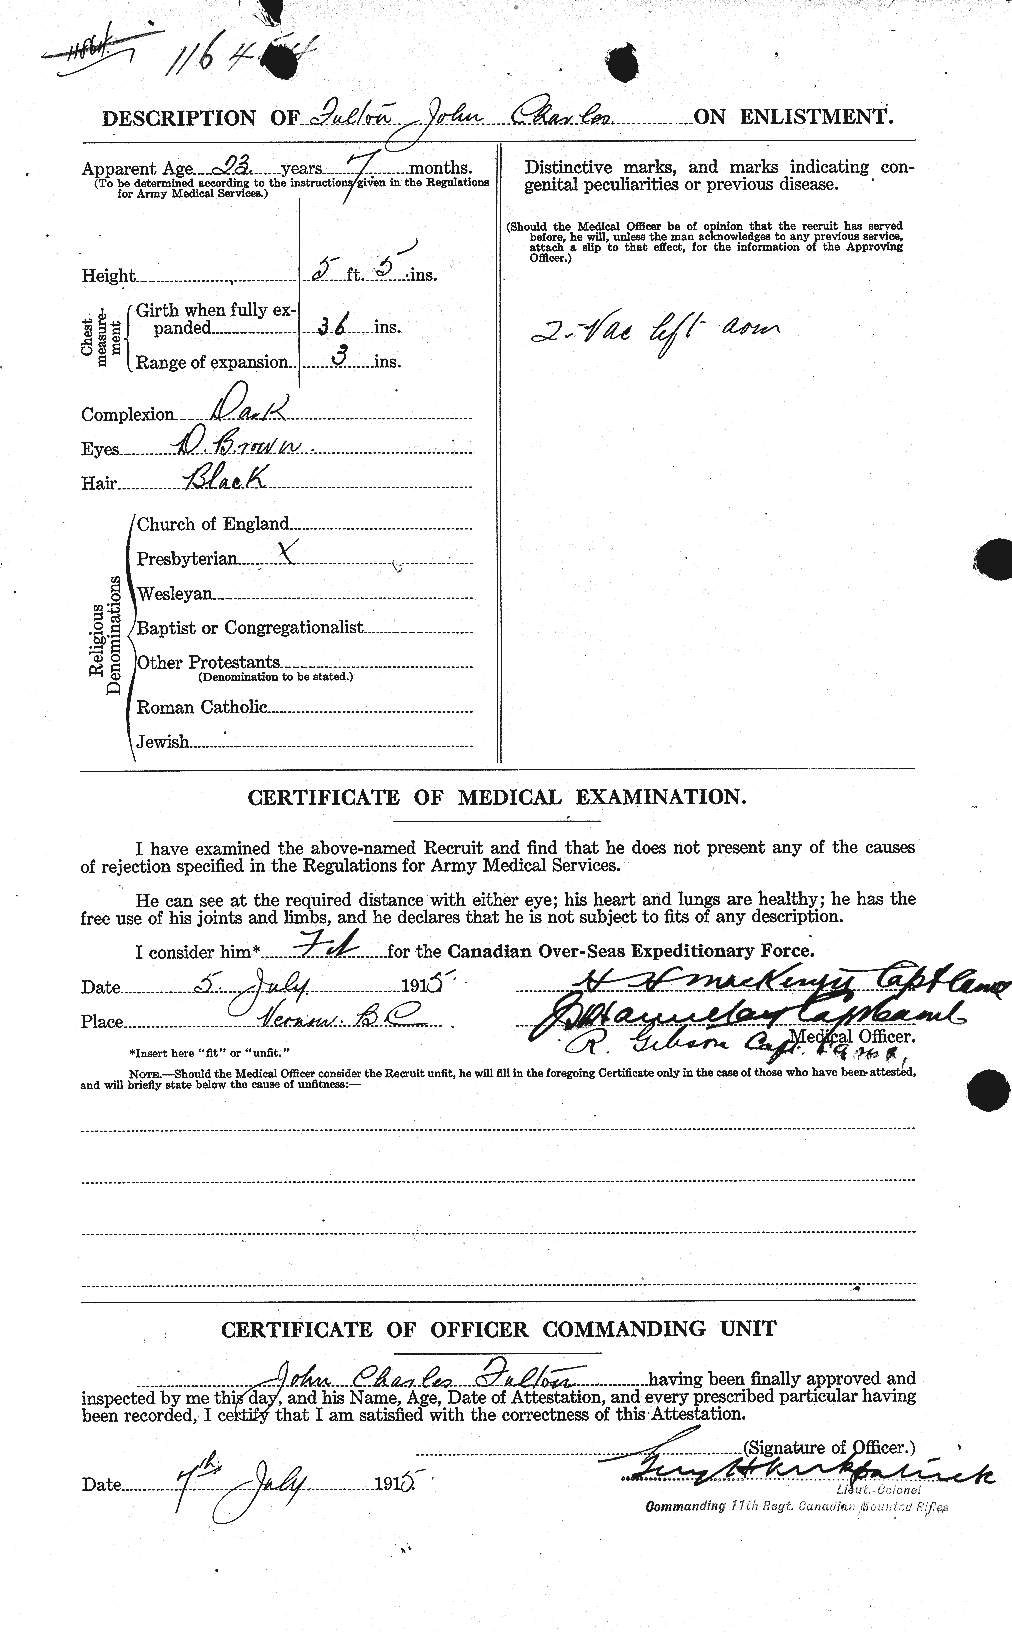 Personnel Records of the First World War - CEF 341401b